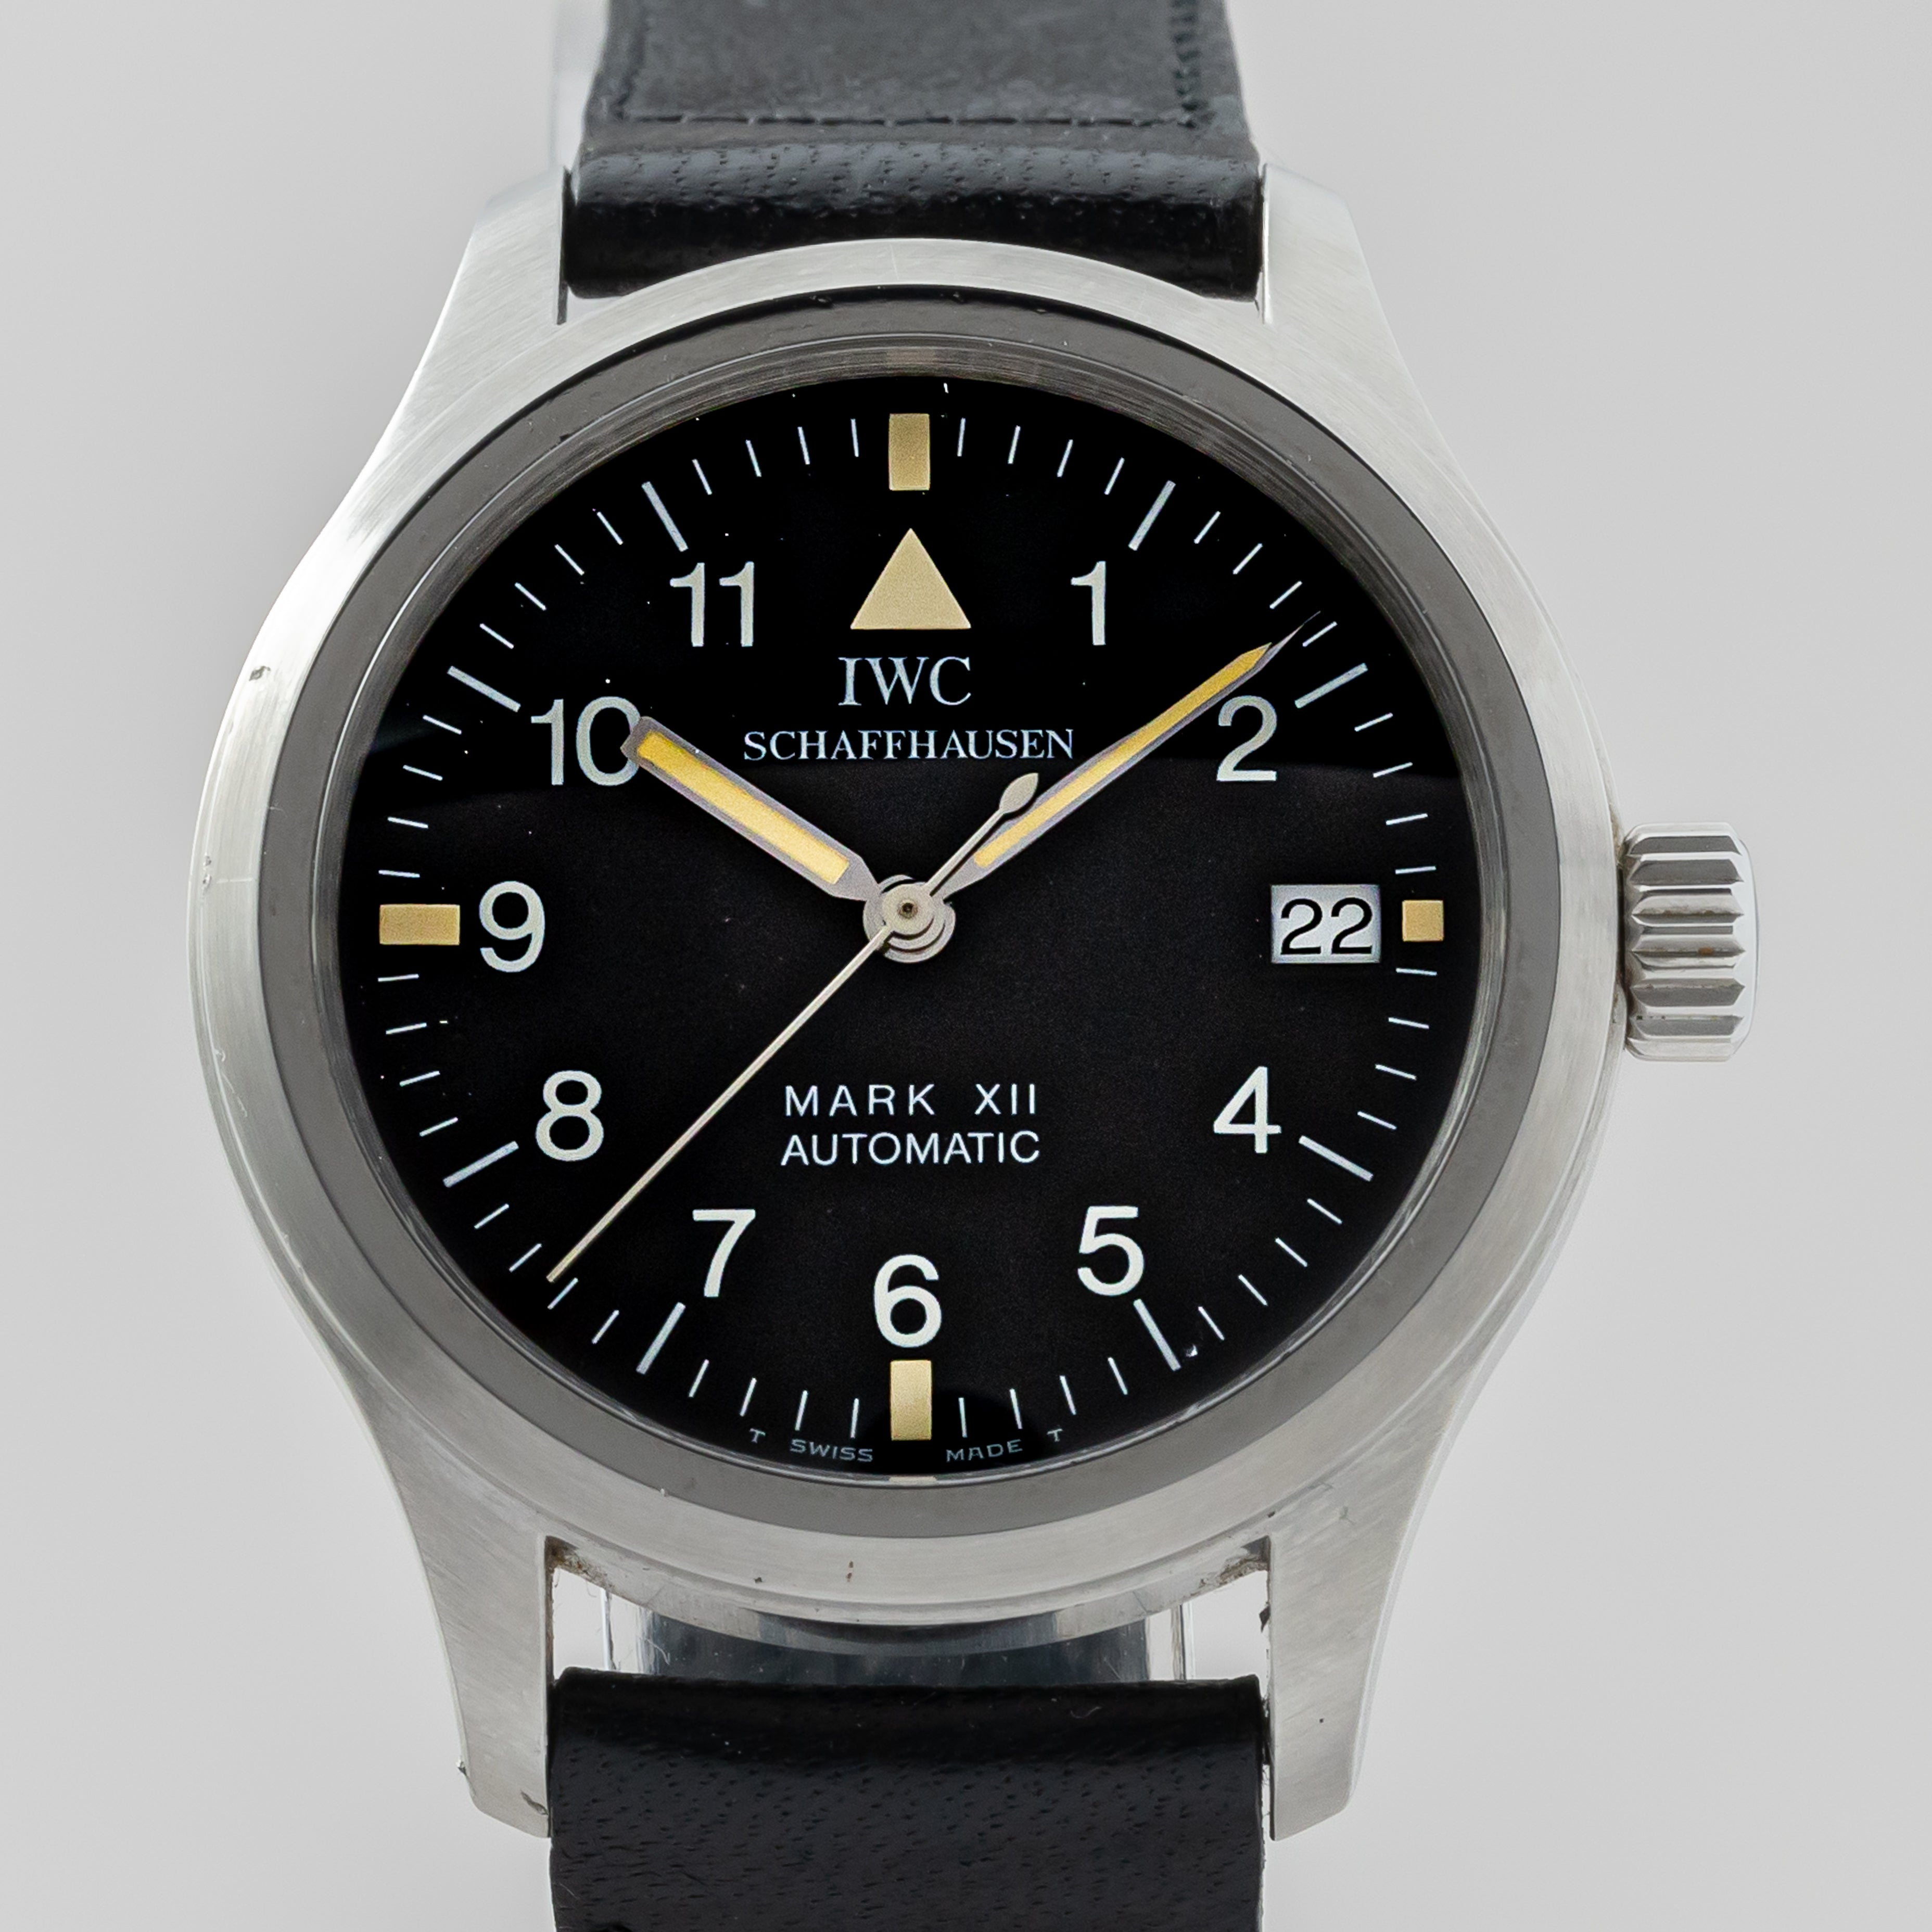 IWC マーク12 1996年製 Cal.884/2 Ref.3241 ギャラ 純正尾錠付き 